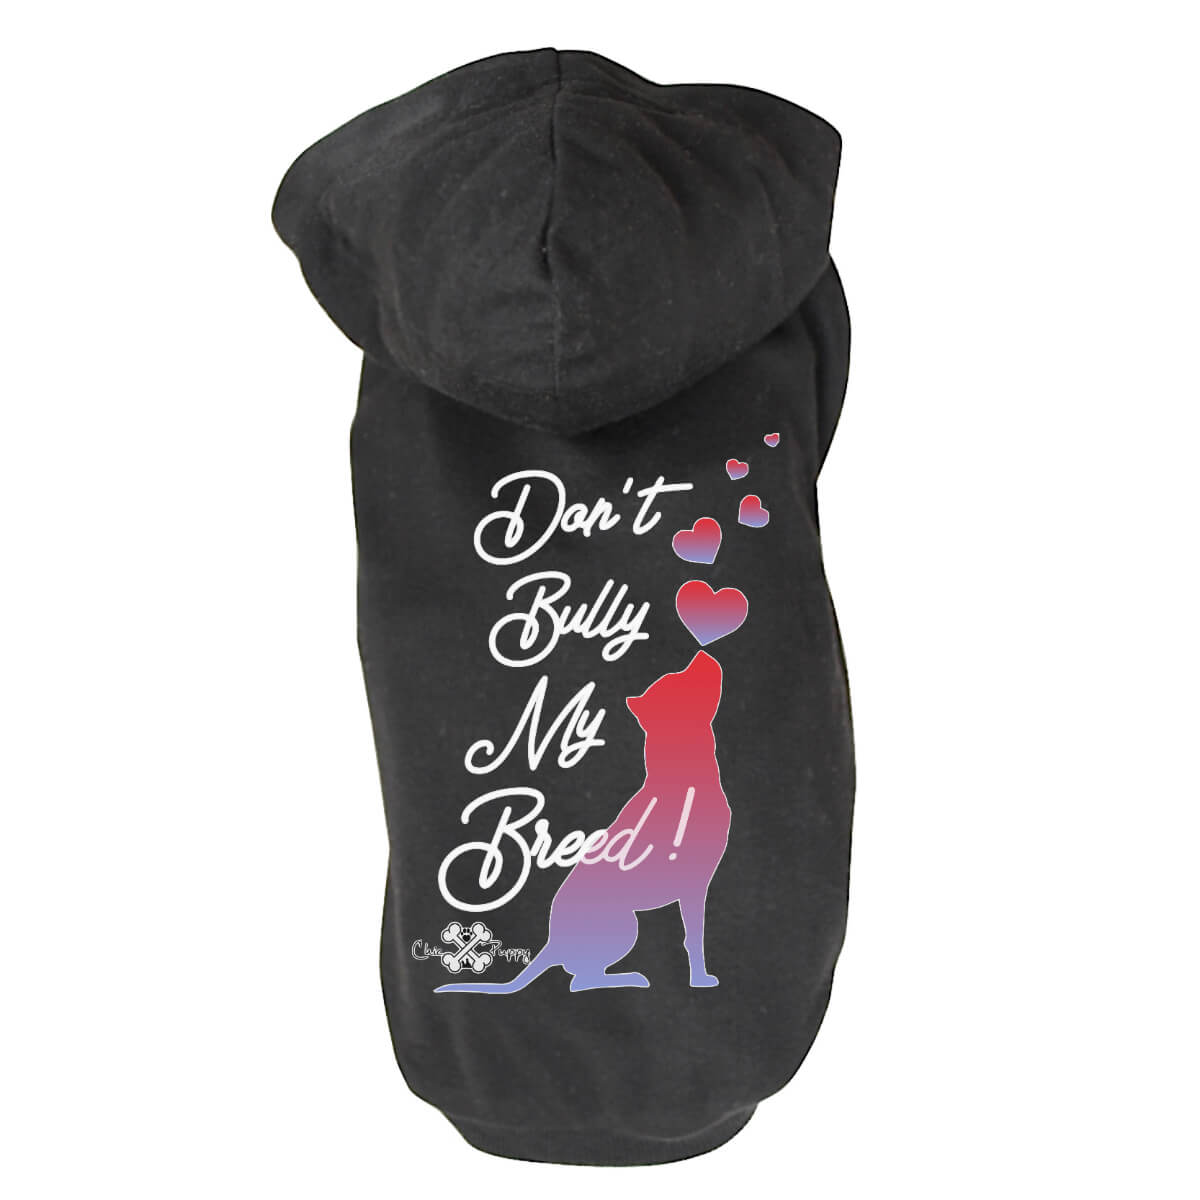 Matching Dog and Owner - Don't Bully My Breed! - Dog Shirts & Hoodies - Dogs